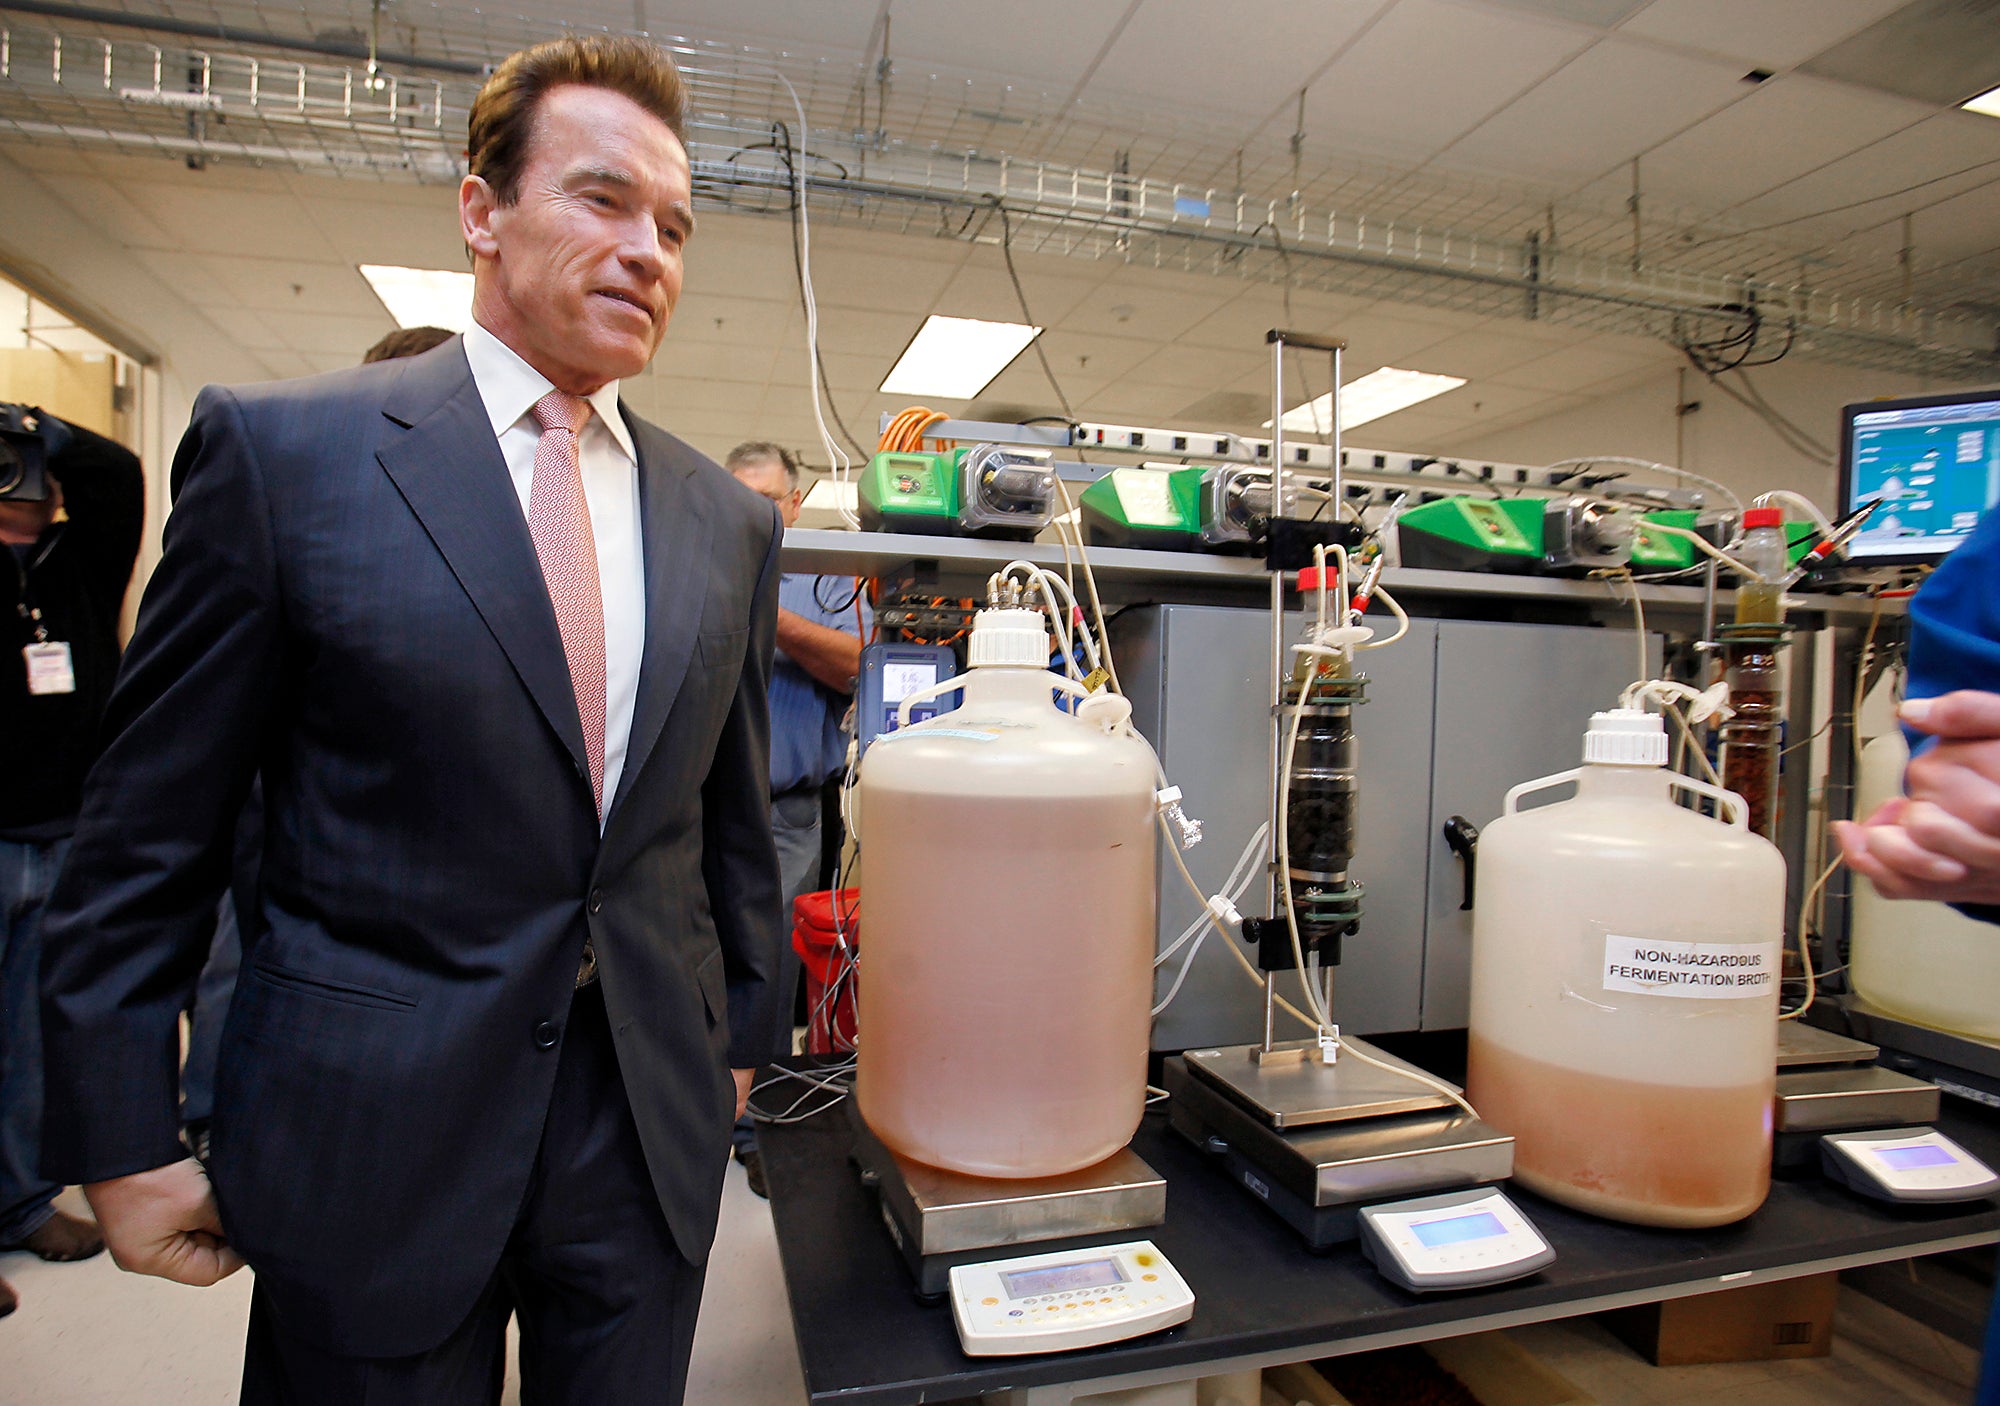 Arnold Schwarzenegger smiles and looks at two large jugs of brown liquid in a laboratory.